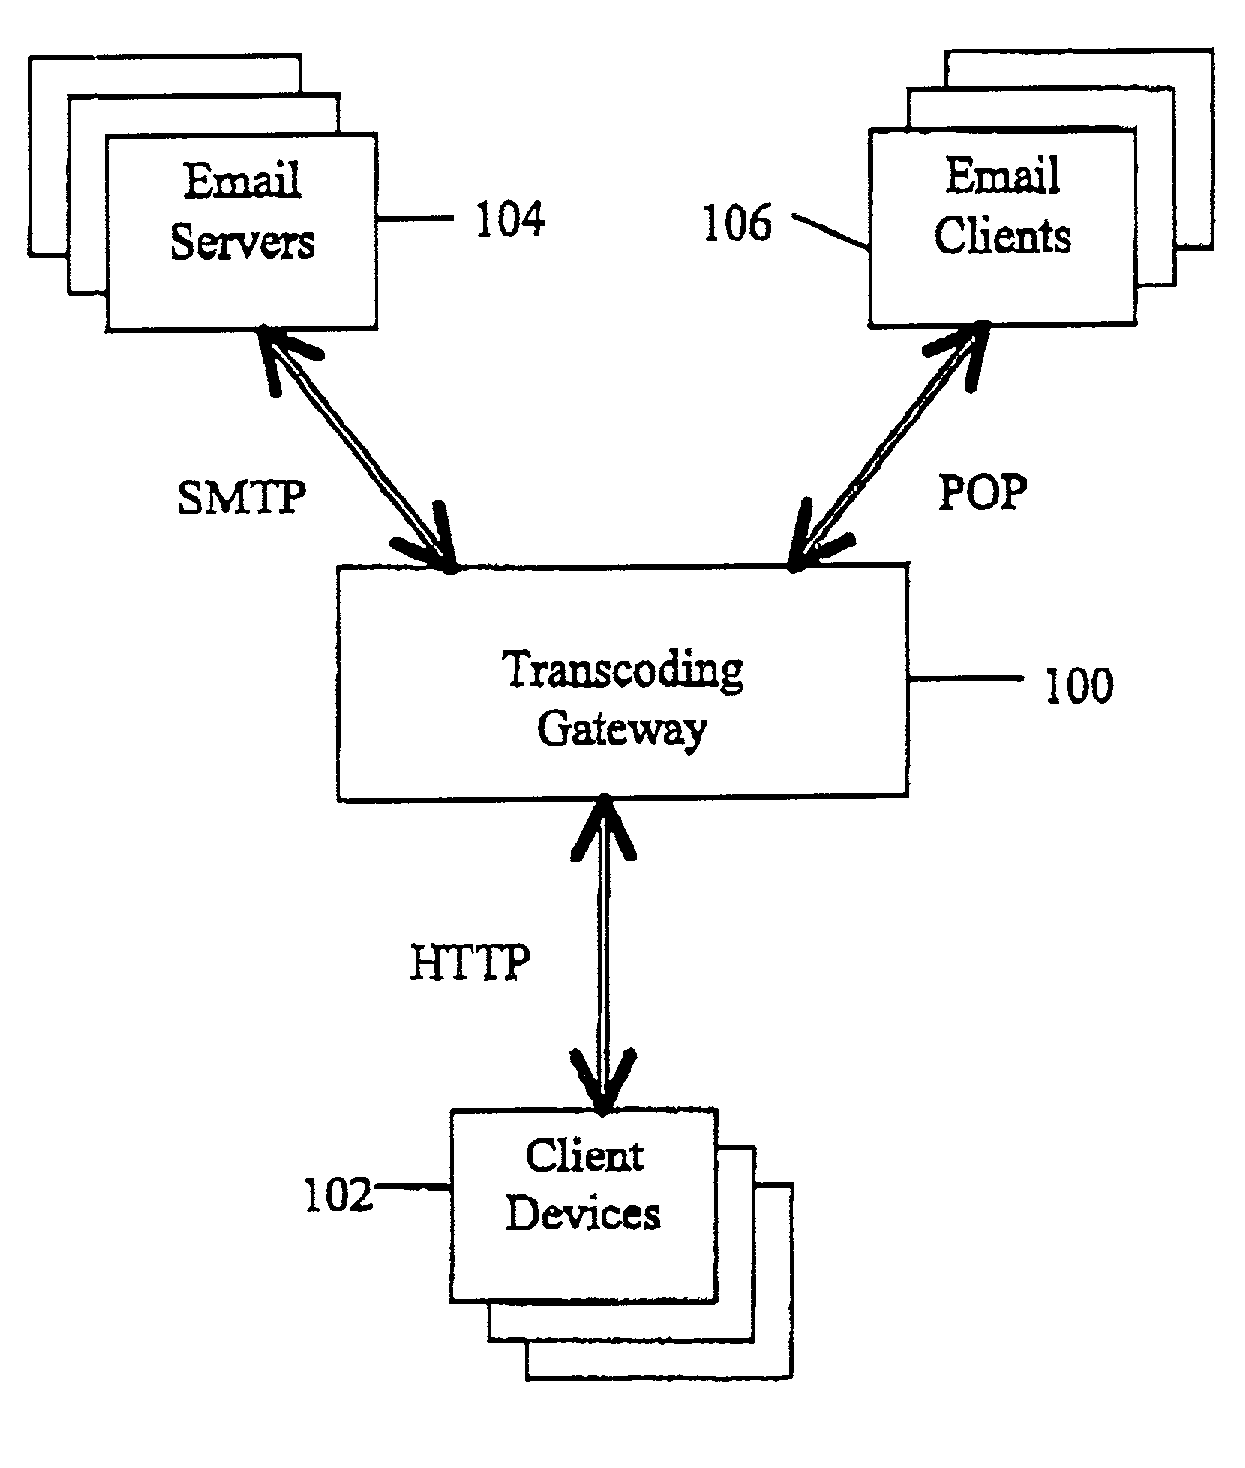 Email routing according to email content